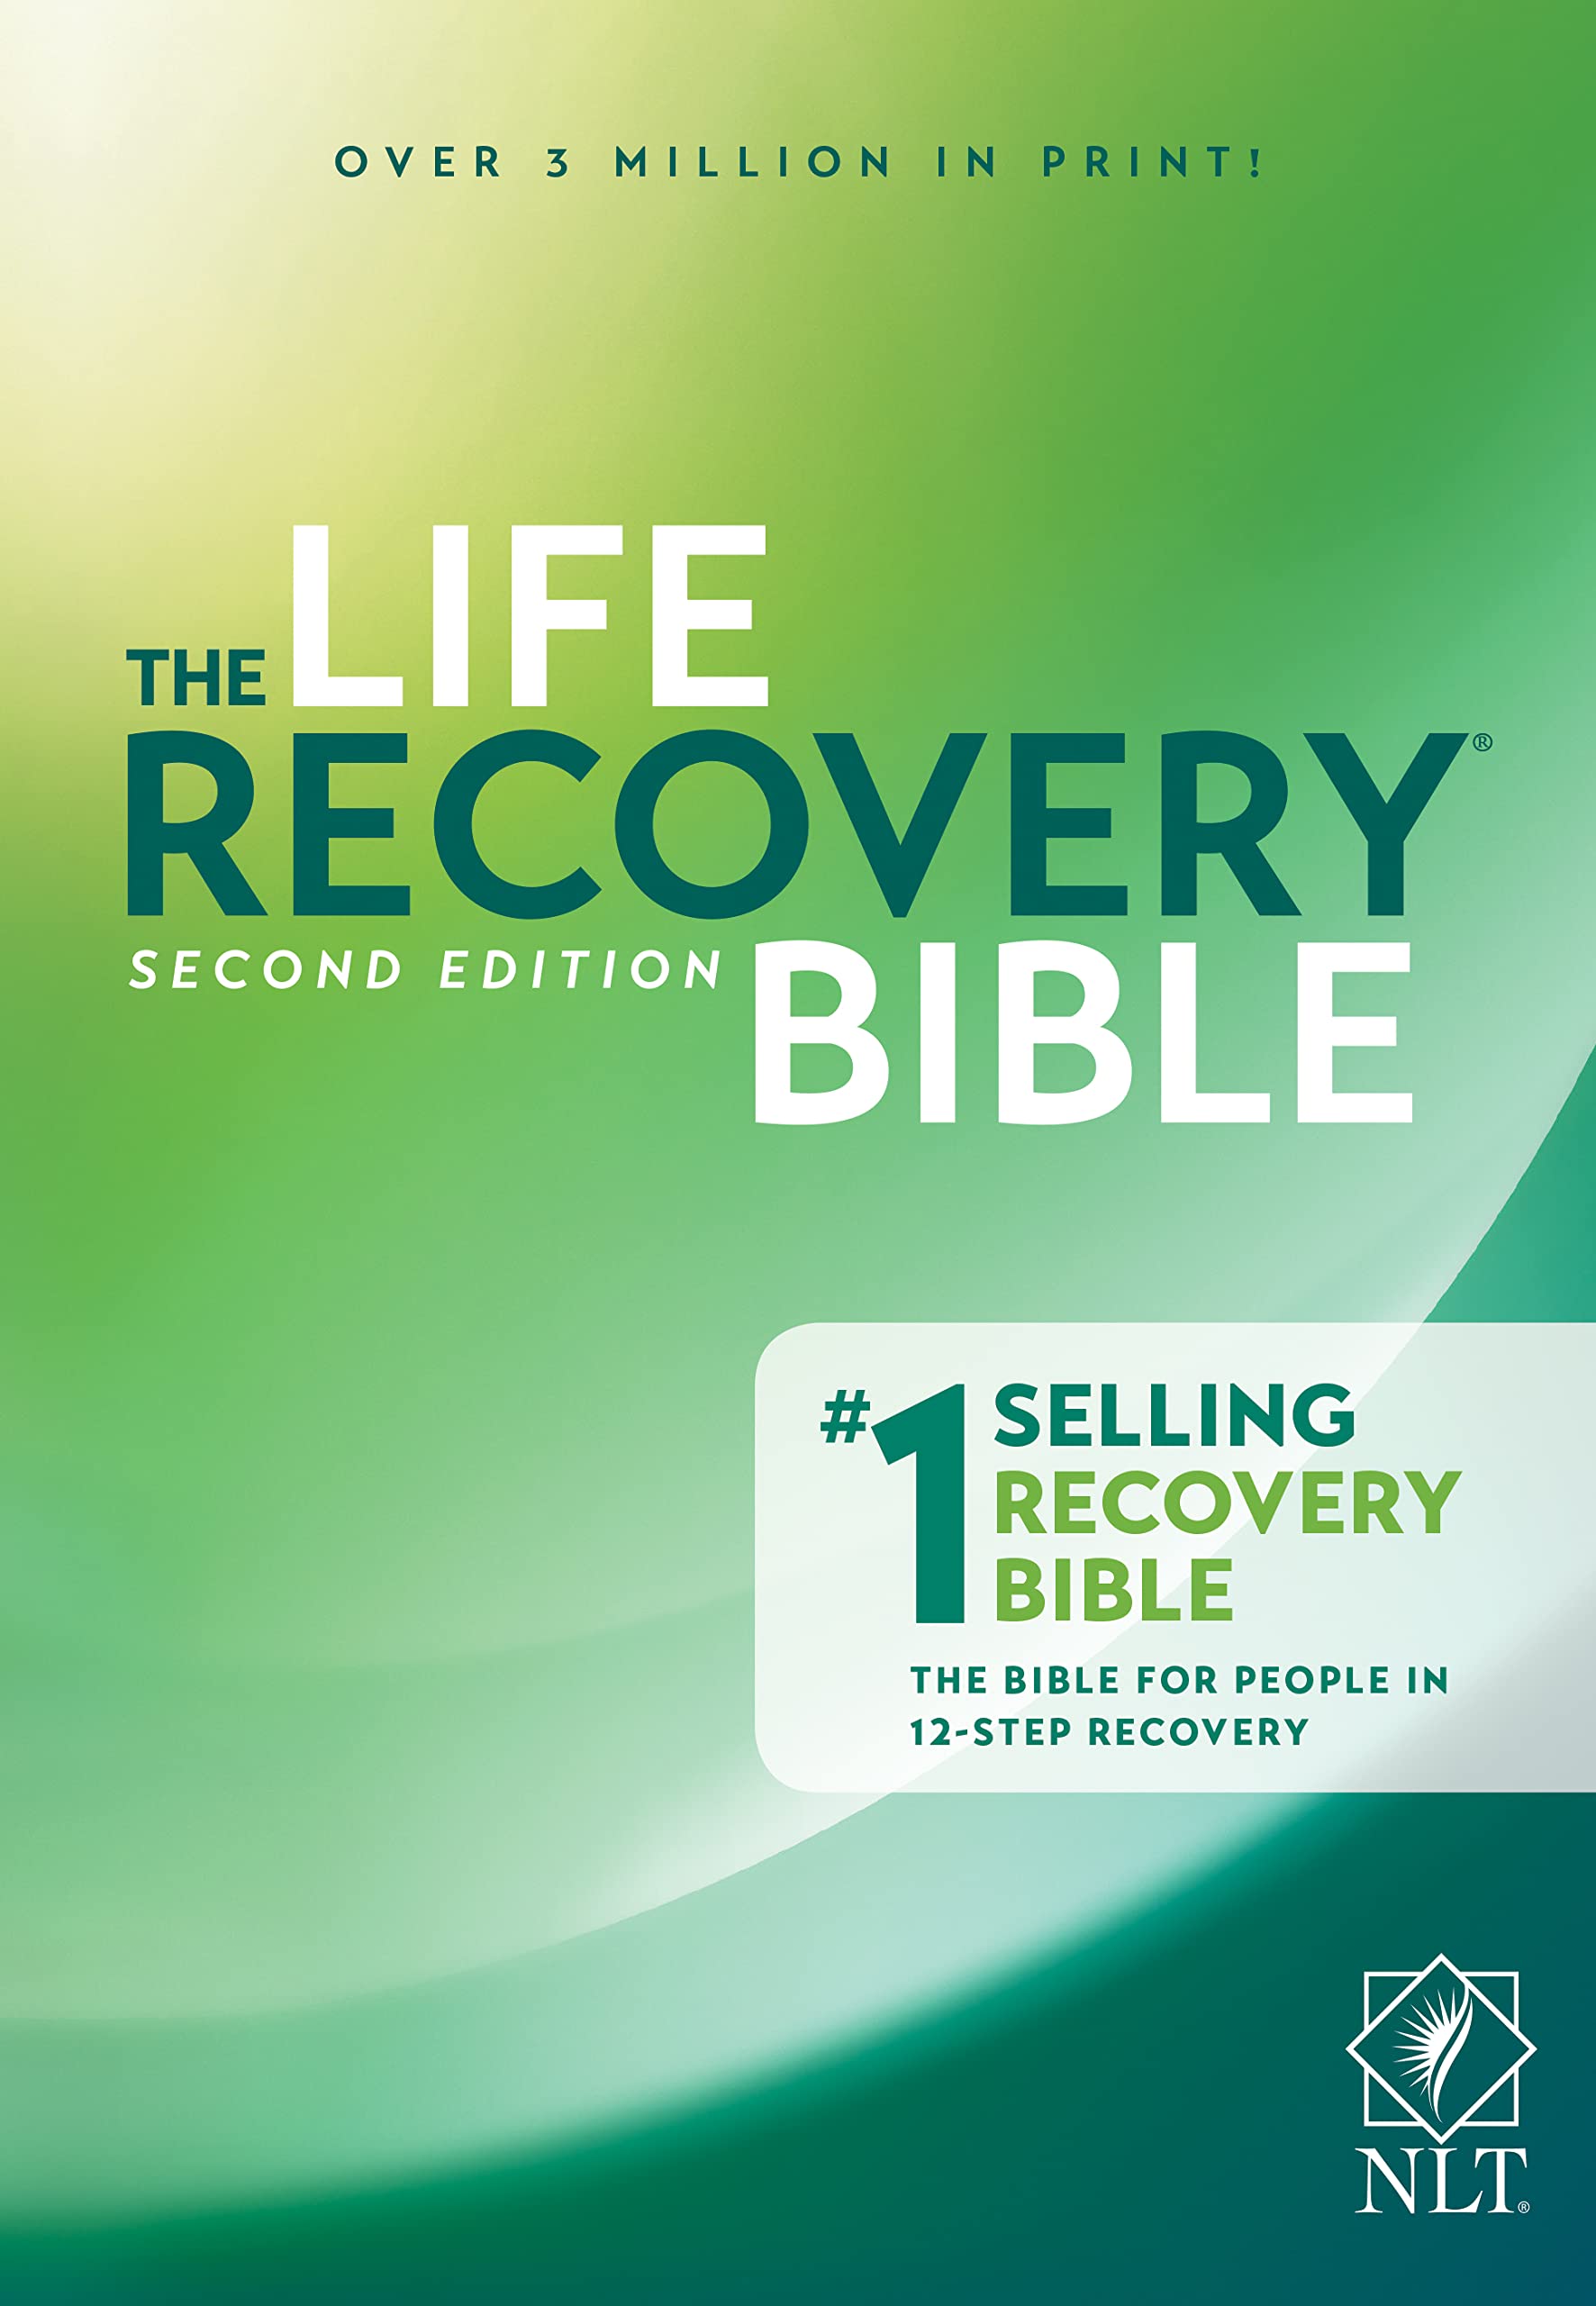 NLT Life Recovery Bible (Softcover): 2nd Edition: Addiction Bible Tied to 12 Steps of Recovery for Help with Drugs, Alcohol, Personal Struggles – With Meeting Guide